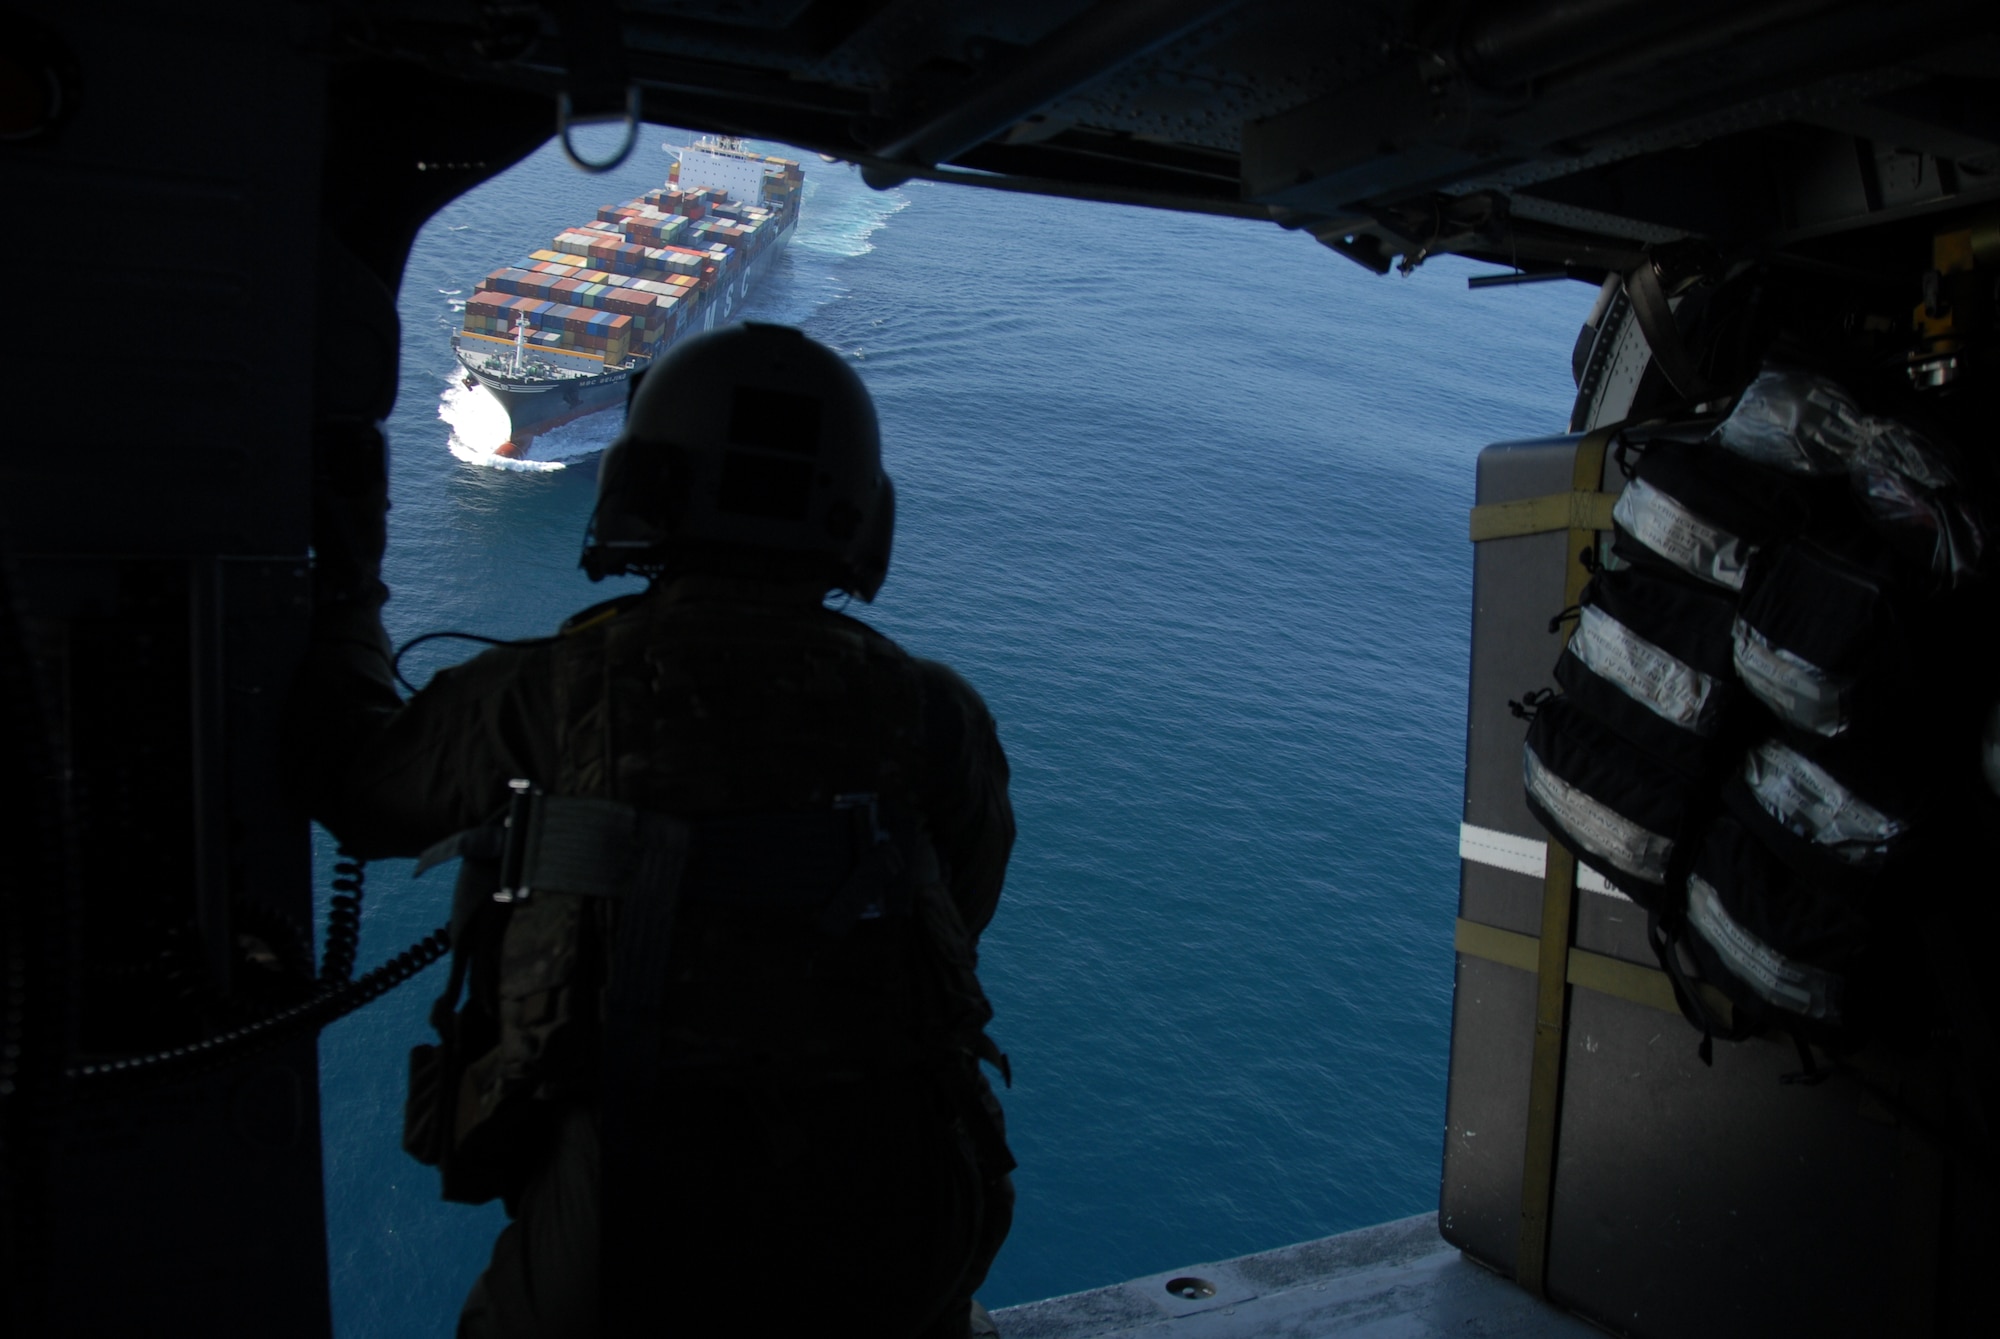 Staff Sgt. Michael Wang, an aerial gunner assigned to the 129th Rescue Squadron, watches for the pararescueman aboard MSC Beijing to signal for pick up Feb. 4, 2012. Responding to the call from the Eleventh District Coast Guard at Alameda, pararescuers, or PJs, two Pave Hawks and one MC-130P Combat Shadow aircraft departed Moffett Federal Airfield. The team provided medical assistance to a 54-year-old male who had suffered stroke-like symptoms on the cargo ship more than 200 miles off the coast of California. Guardsmen medically evacuated the patient to the San Jose Regional Medical Center. (Air National Guard photo by Senior Airman Jessica Green)